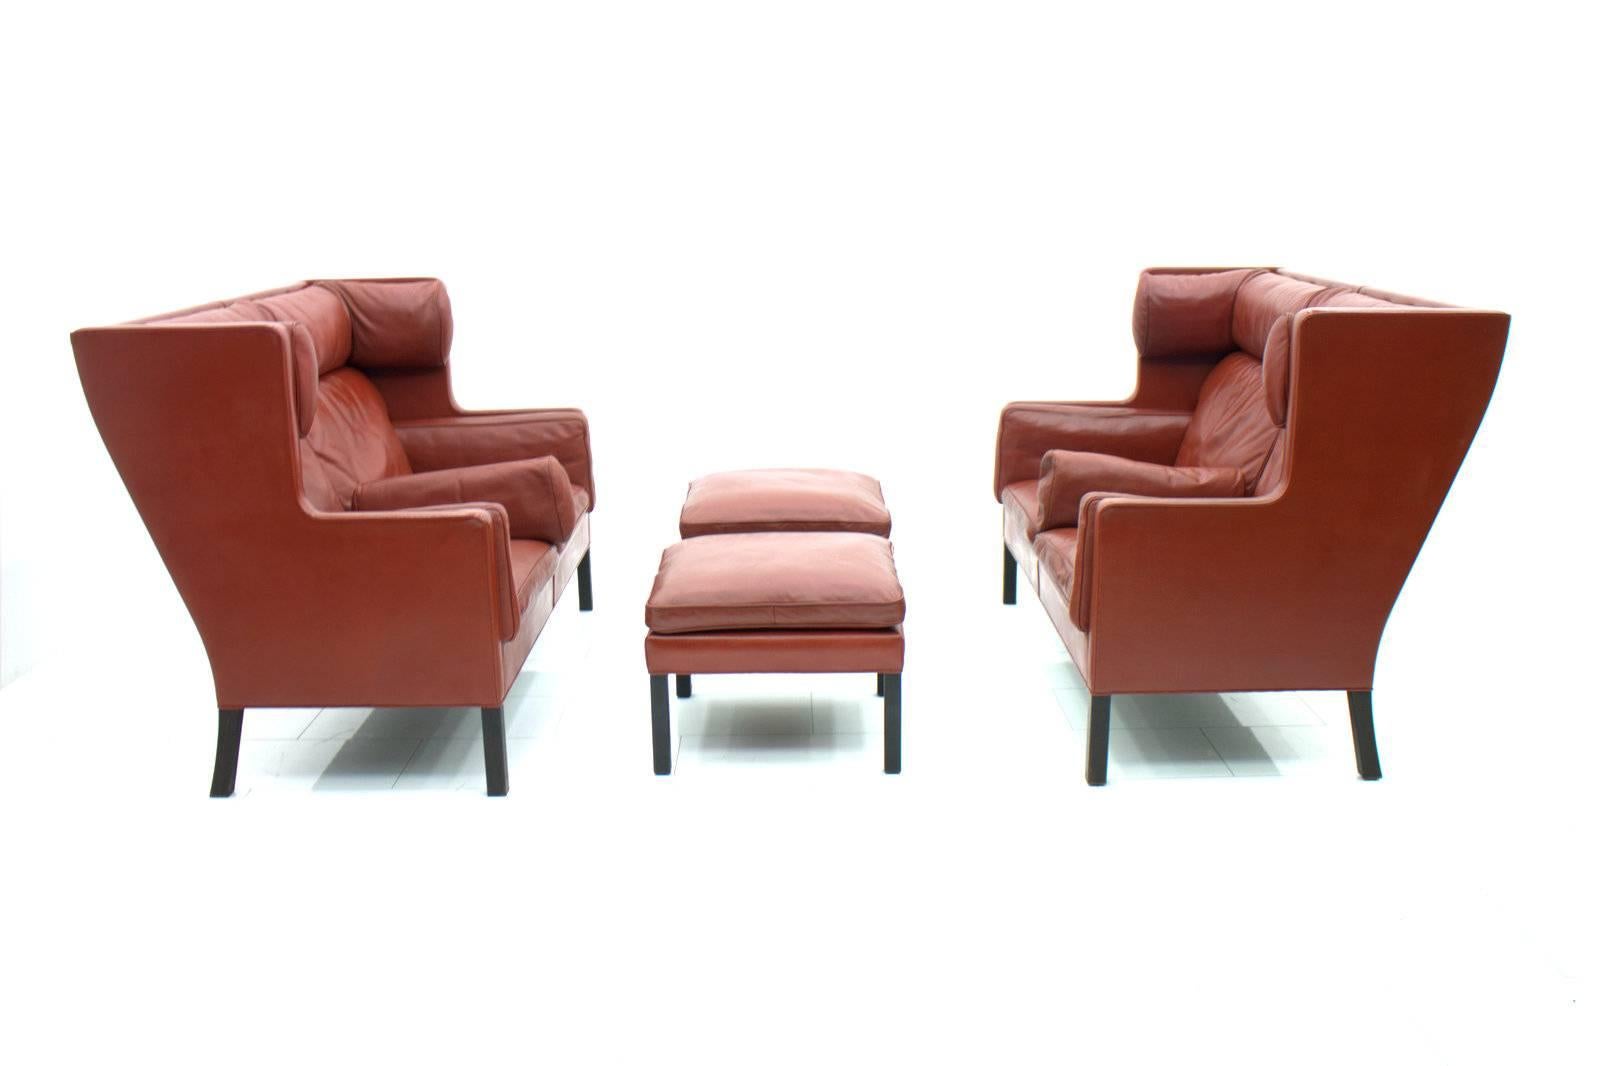 One of Two Børge Mogensen Coupe Leather Sofa, 2192, Frederica, Denmark 1971 2